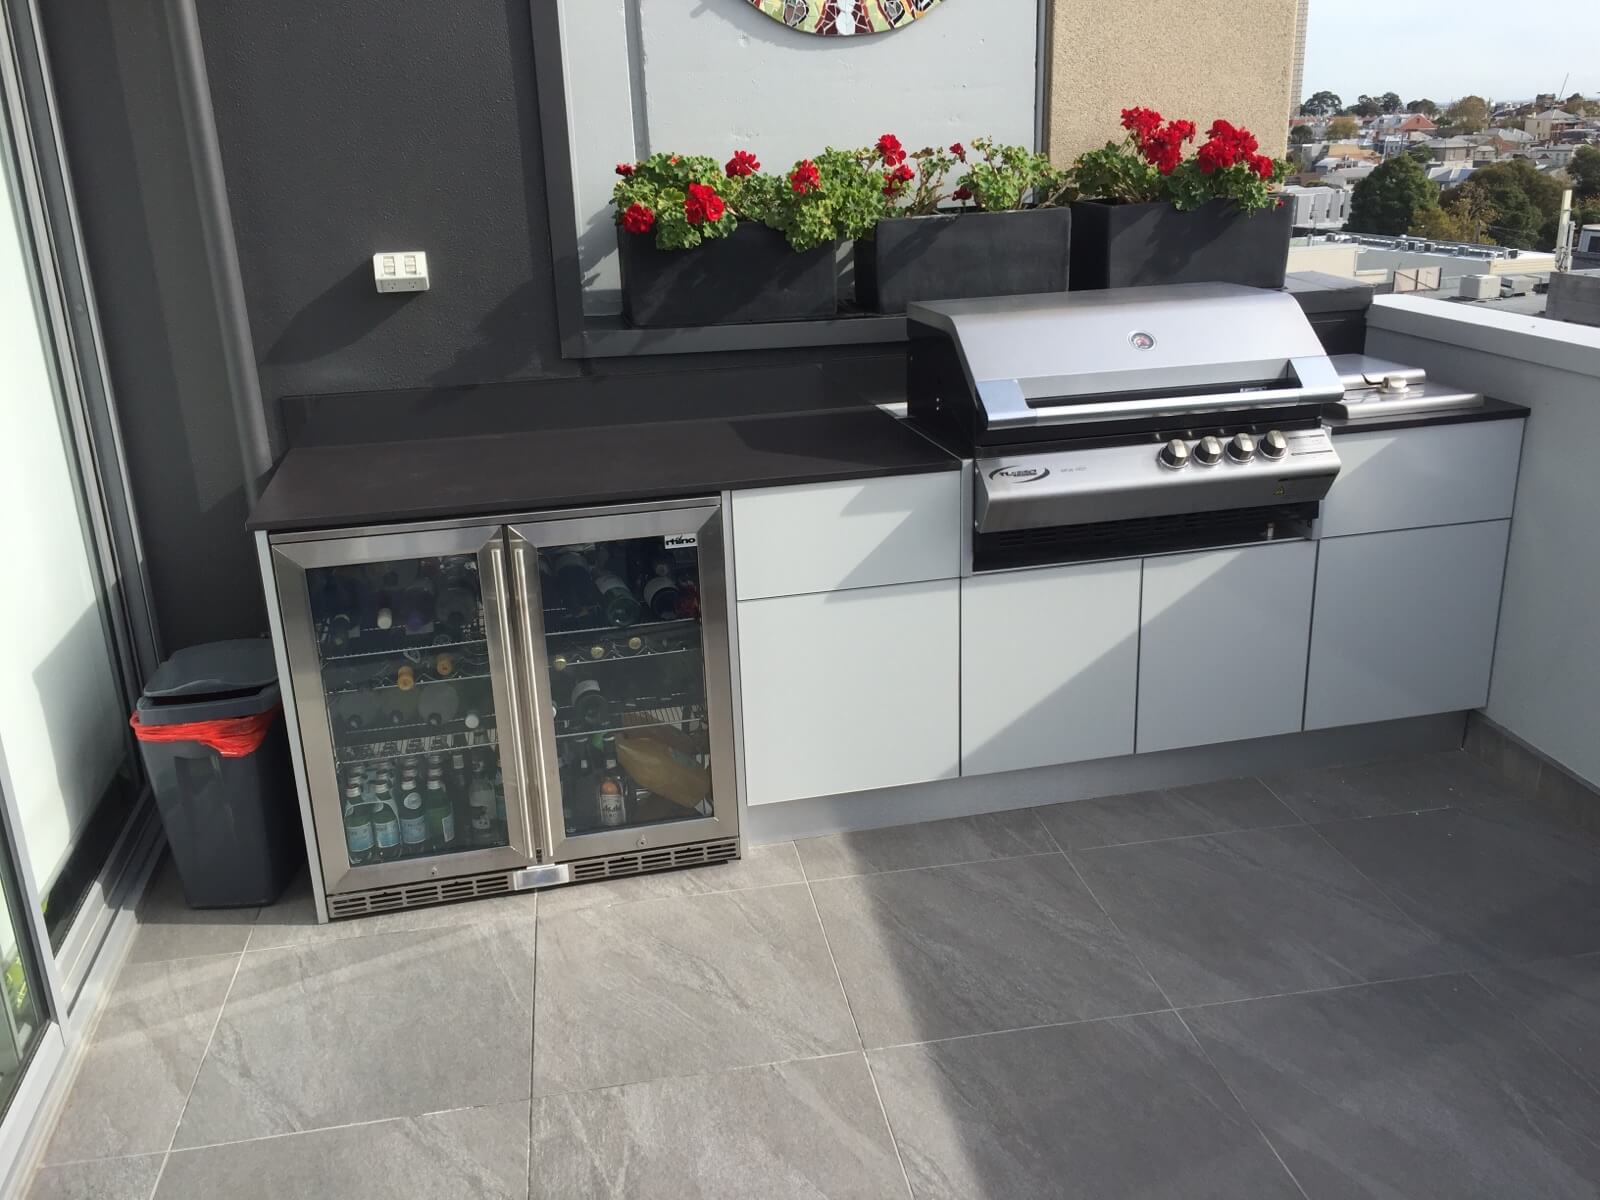 South Melbourne Rooftop Outdoor Kitchen